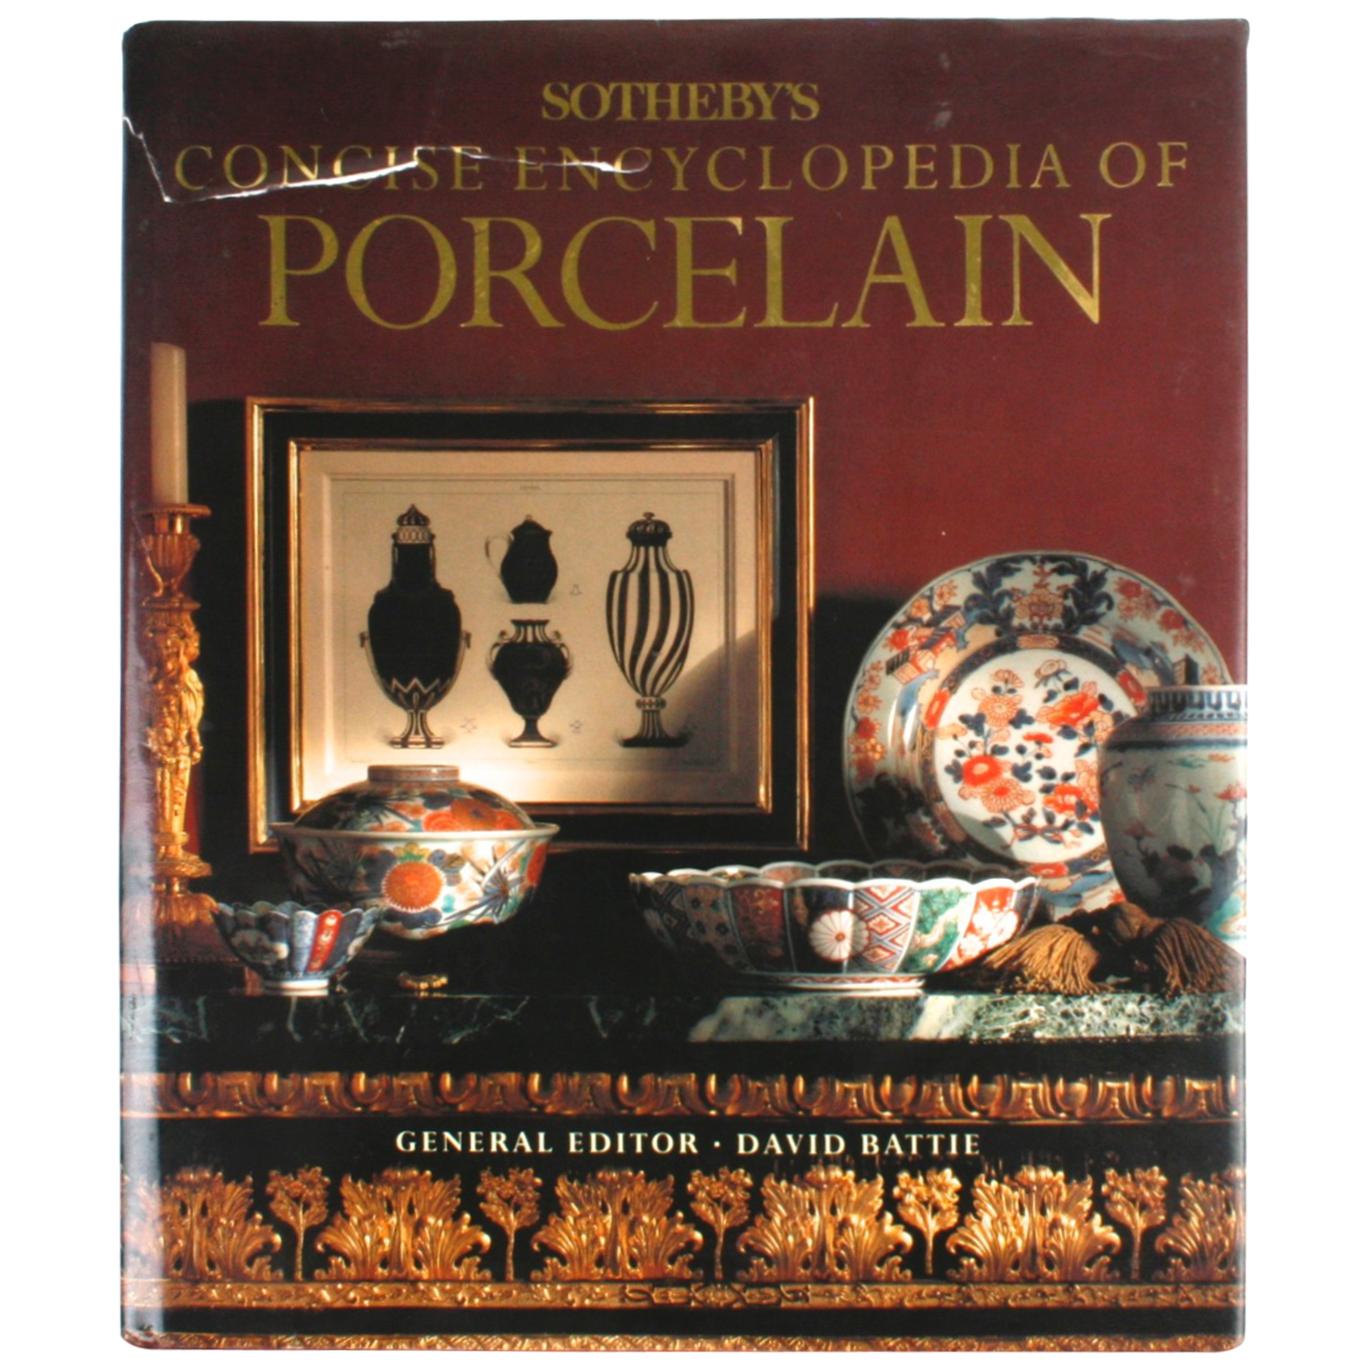 Sotheby's Concise Encyclopedia of Porcelain, First Edition